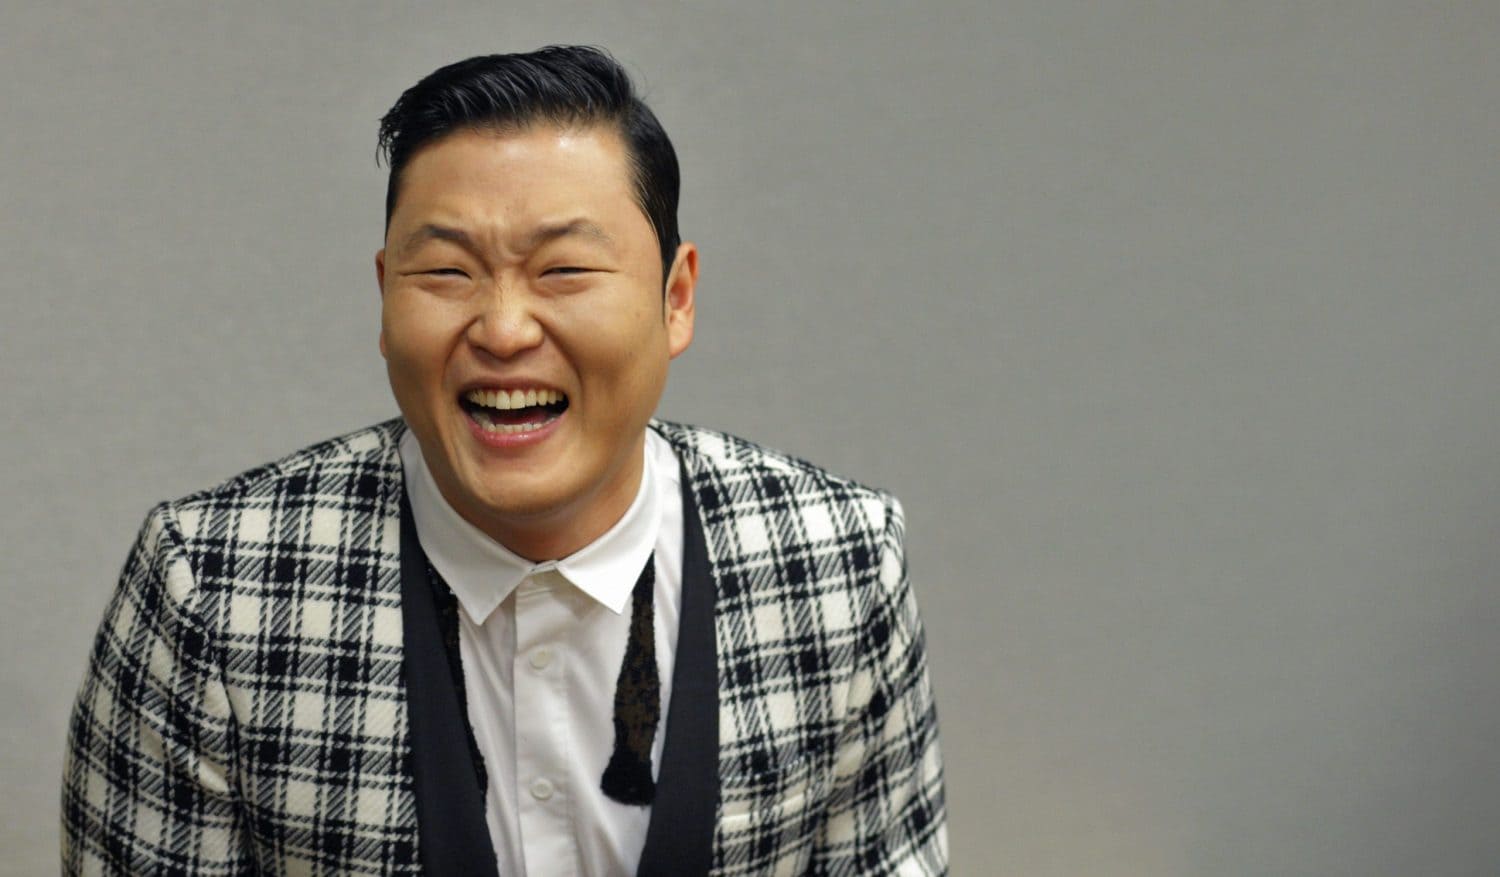 PSY’s Net Worth: All About His Career & Earnings